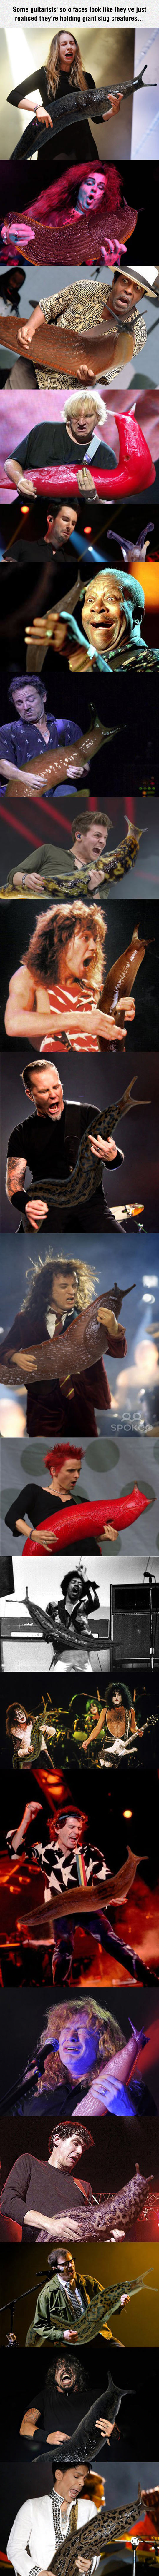 Guitars Replaced With Slugs